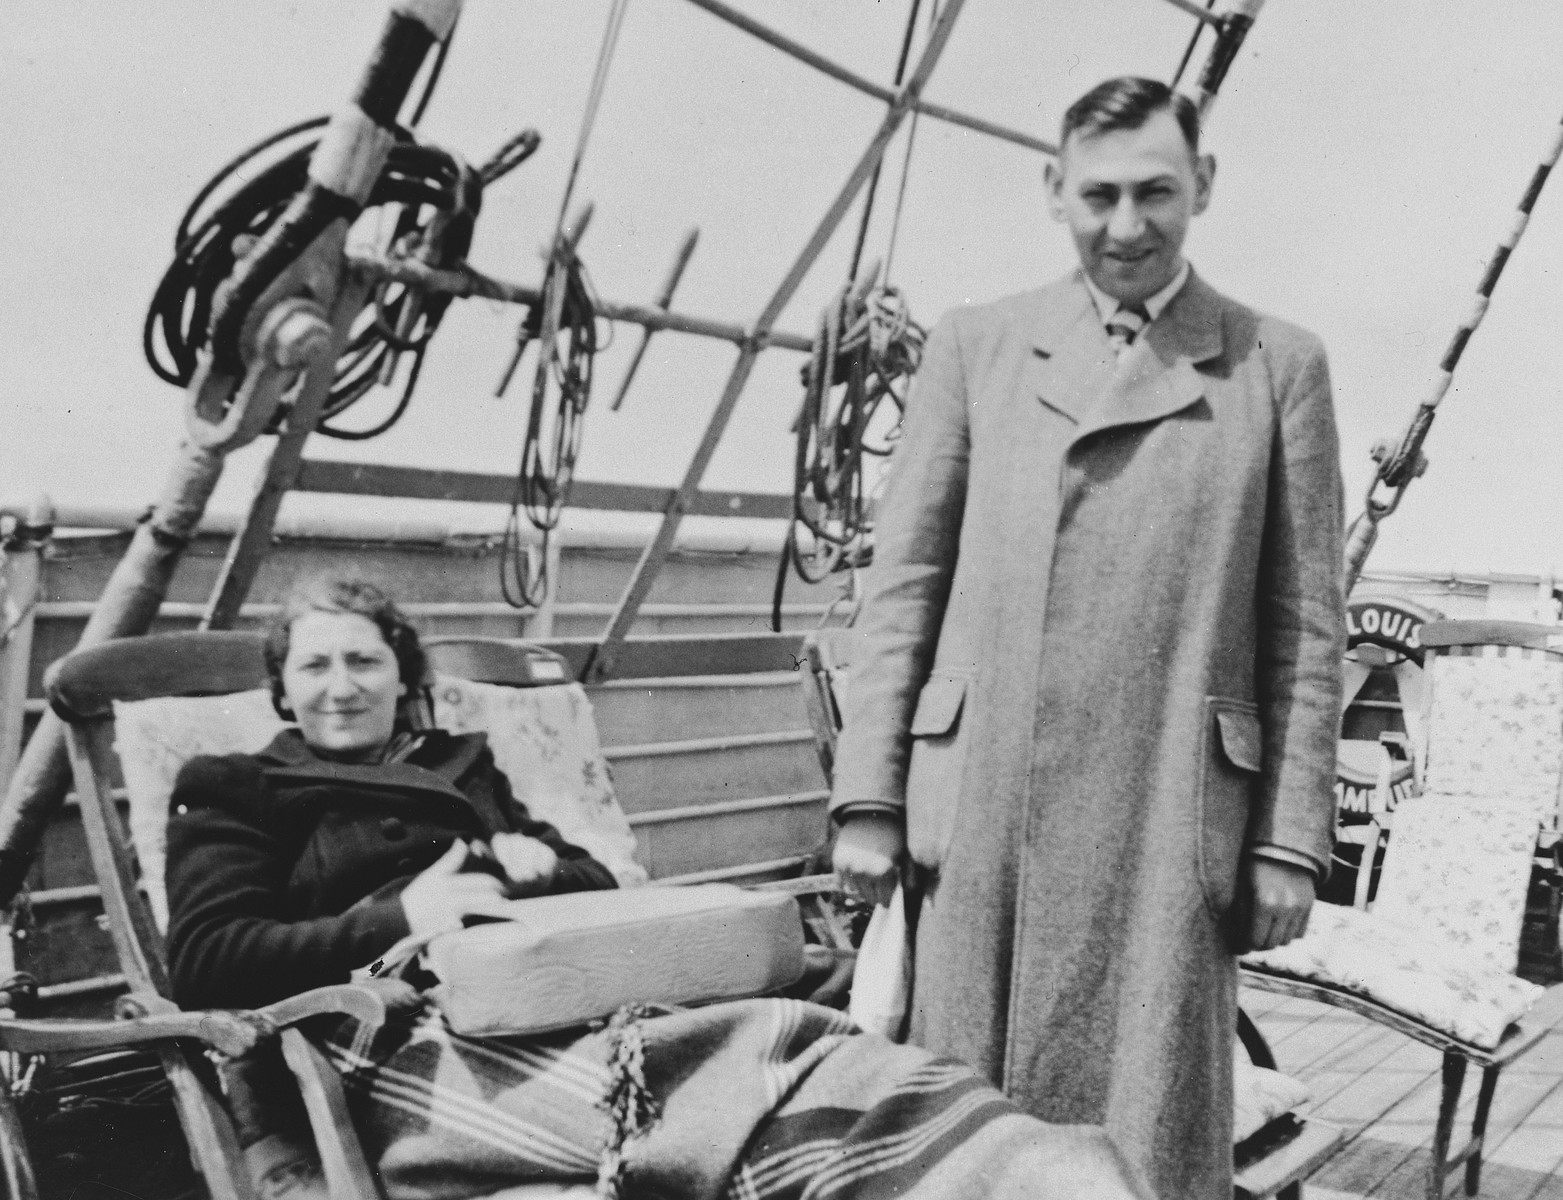 A female Jewish refugee relaxes on a deck chair while her husband stands next to her on the upper deck of the St. Louis.

Pictured are Ilse and Kurt Marcus.